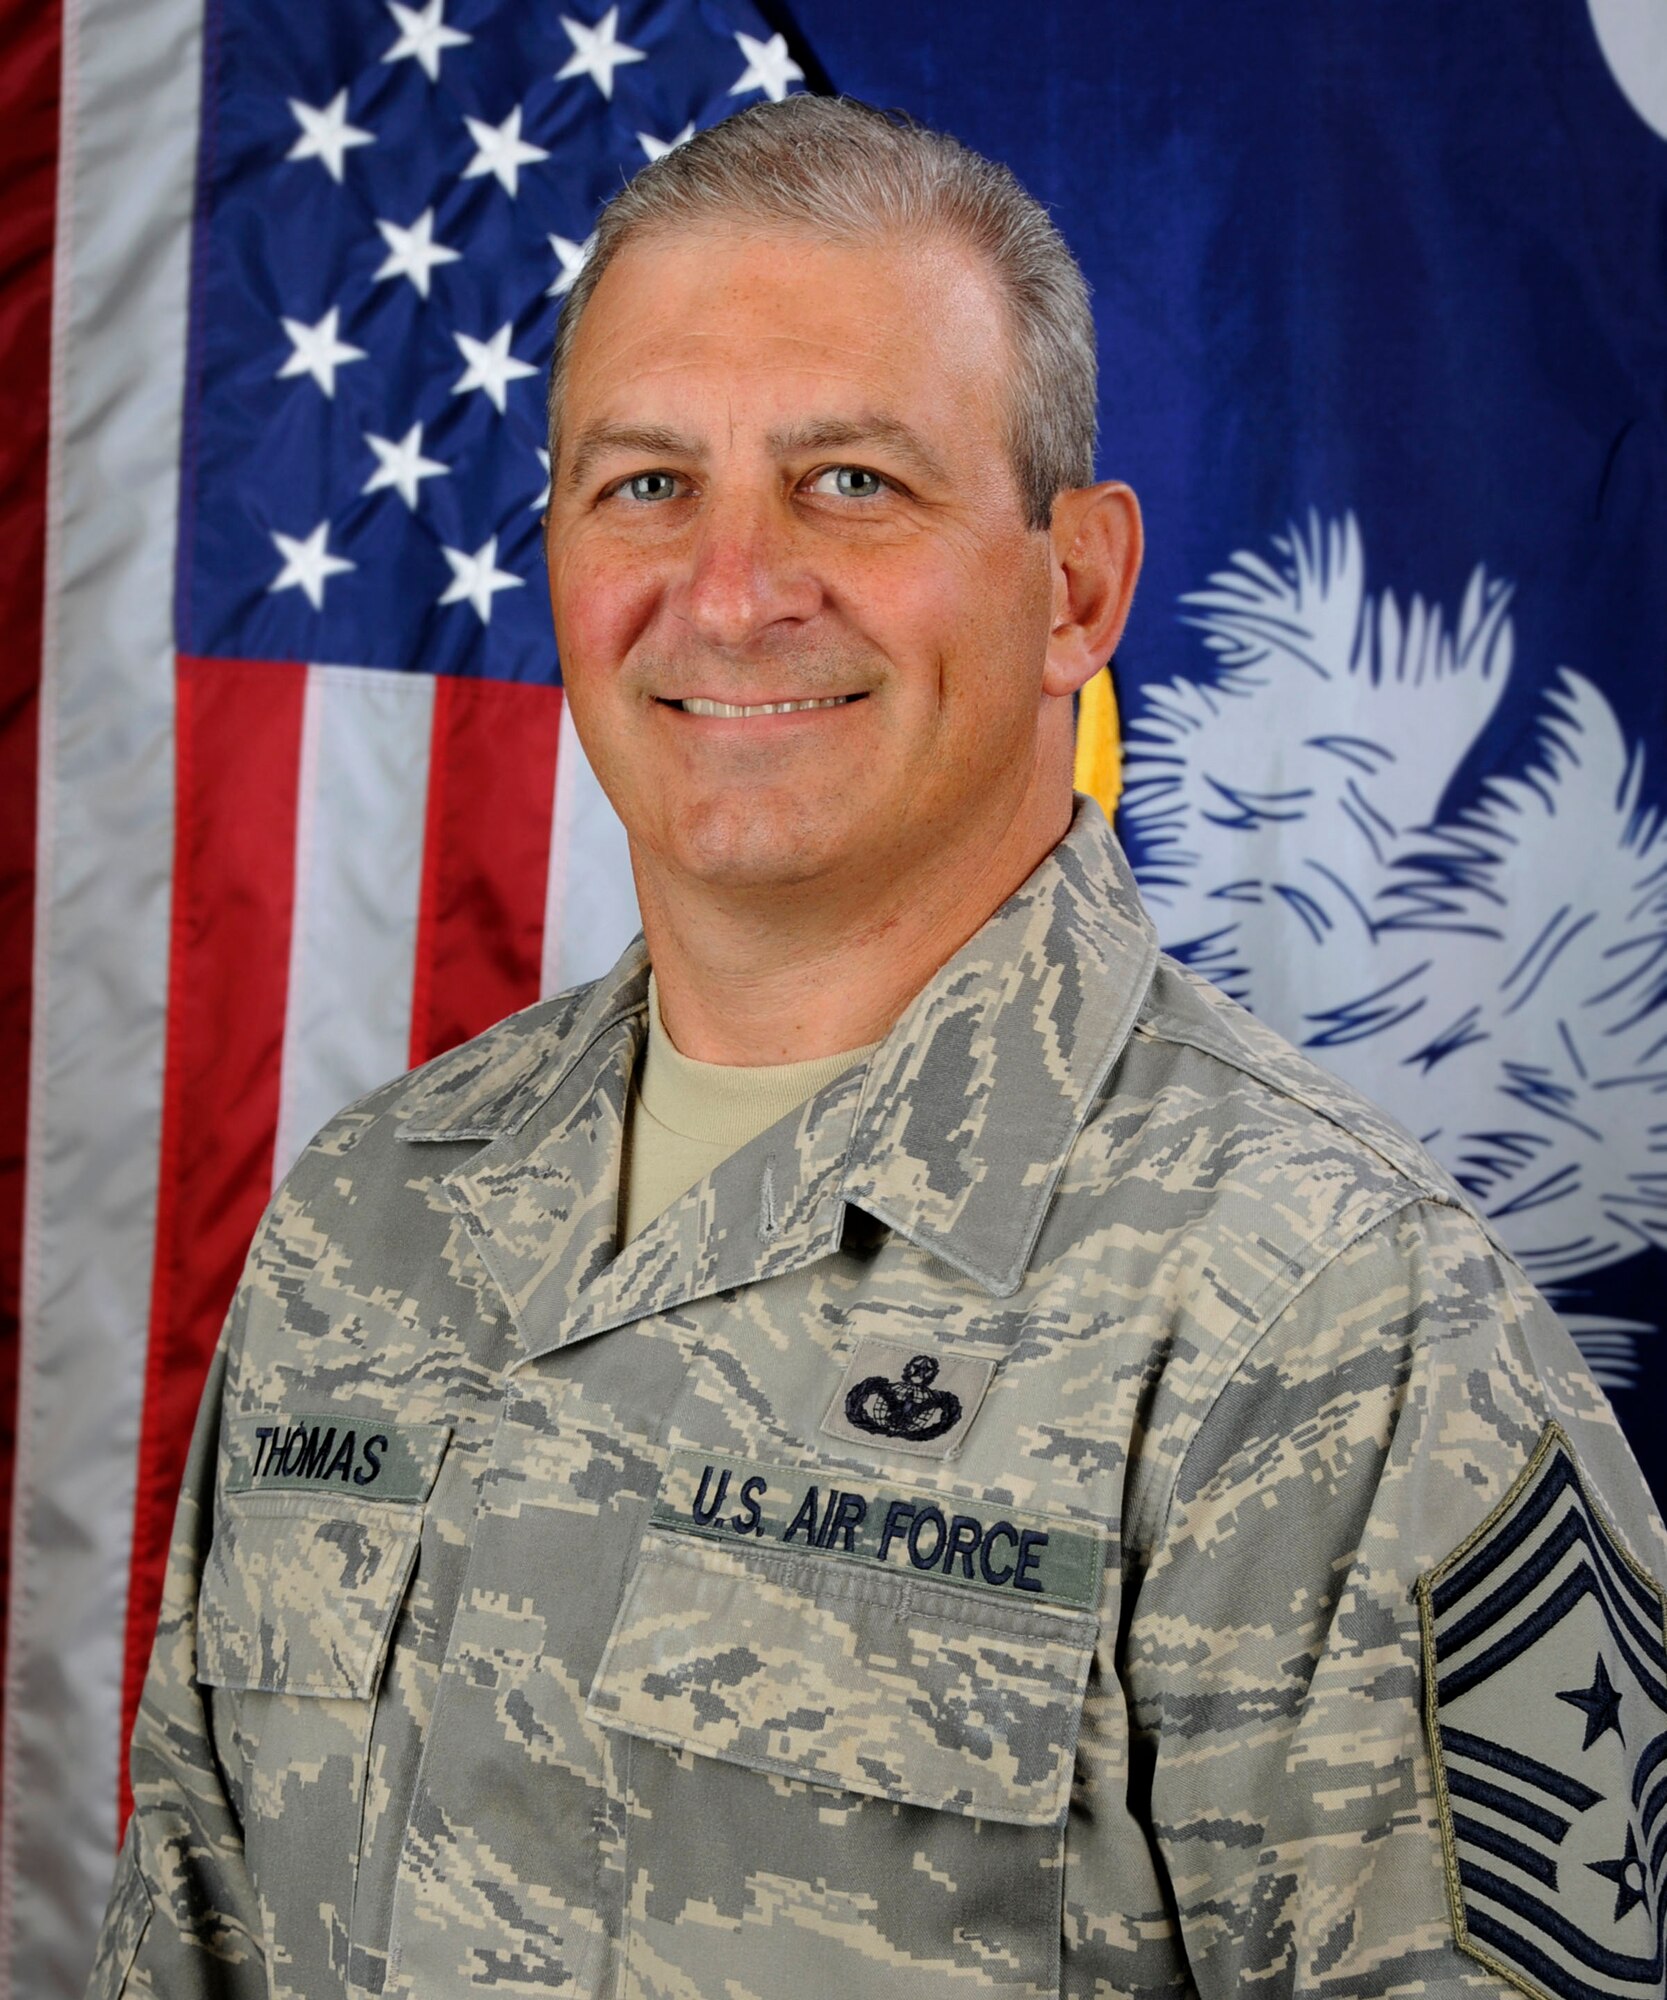 Portrait of U.S. Air Force Chief Master Sgt. Kevin Thomas, State Command Chief for the South Carolina Air National Guard at McEntire Joint National Guard Base, S.C., June 13, 2016. (U.S. Air National Guard photo by Senior Master Sgt. Edward Snyder)